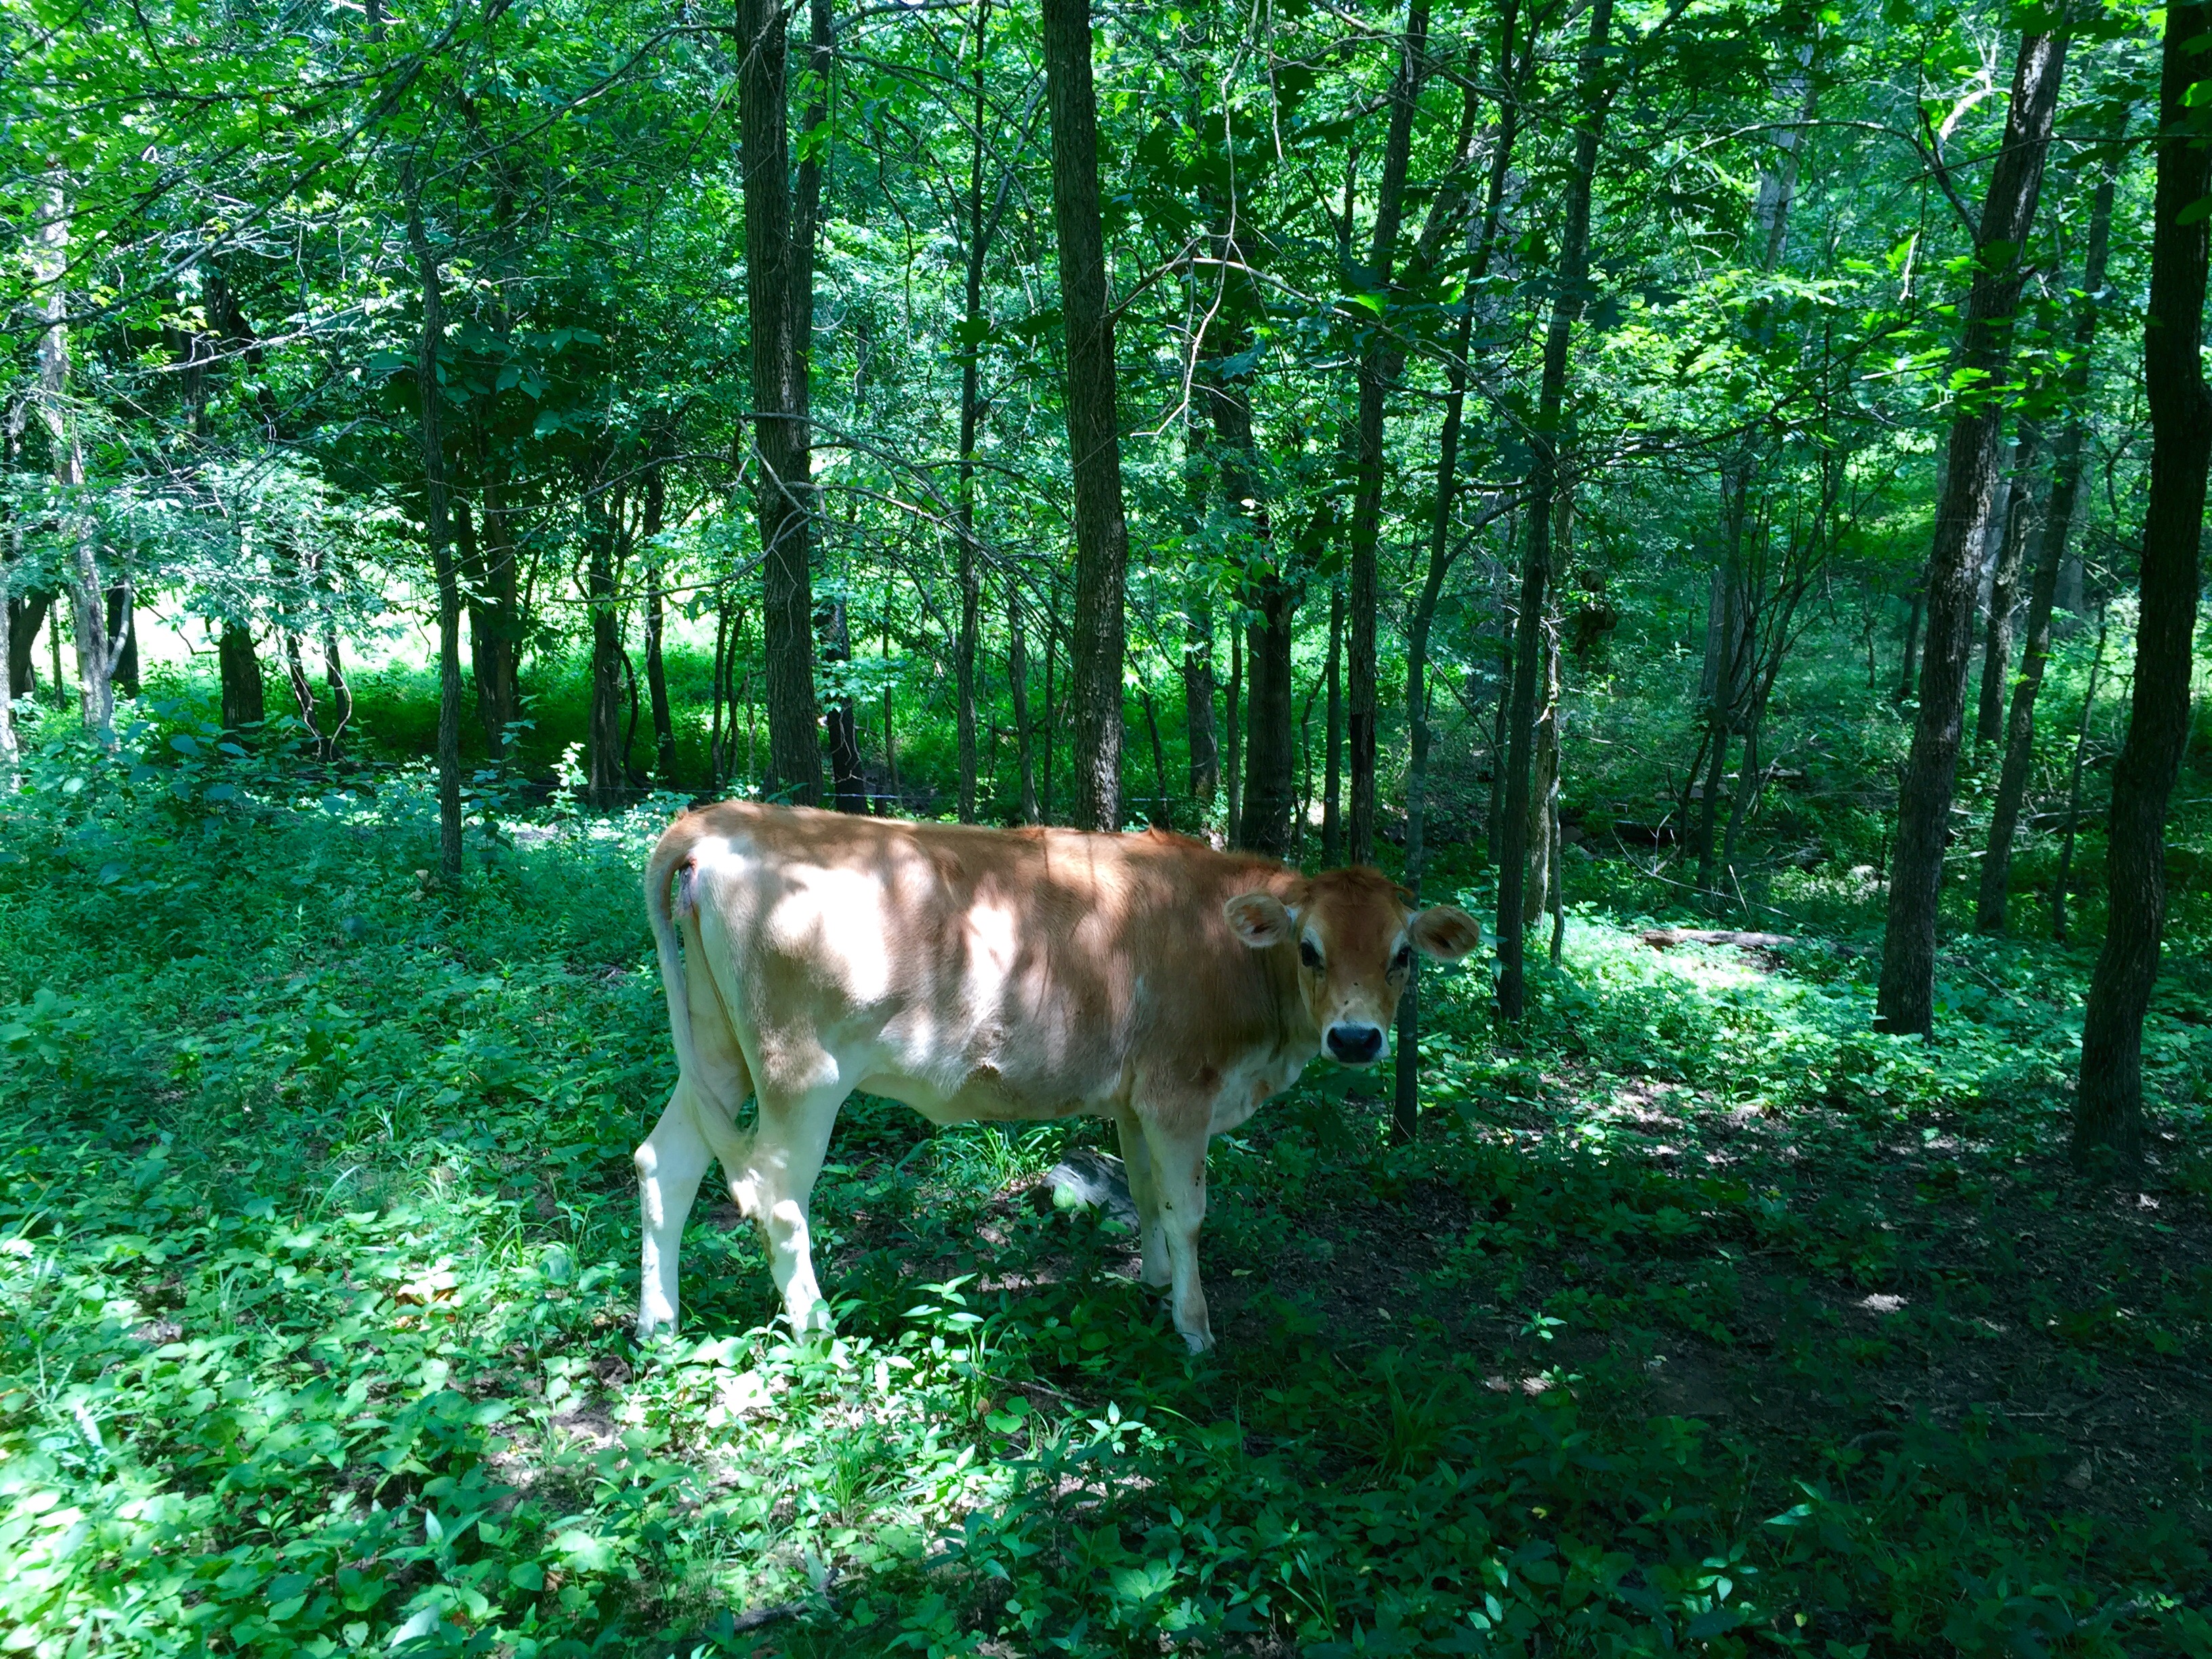 Cows on Joseph Mast's farm are regularly moved to manage grass growth.